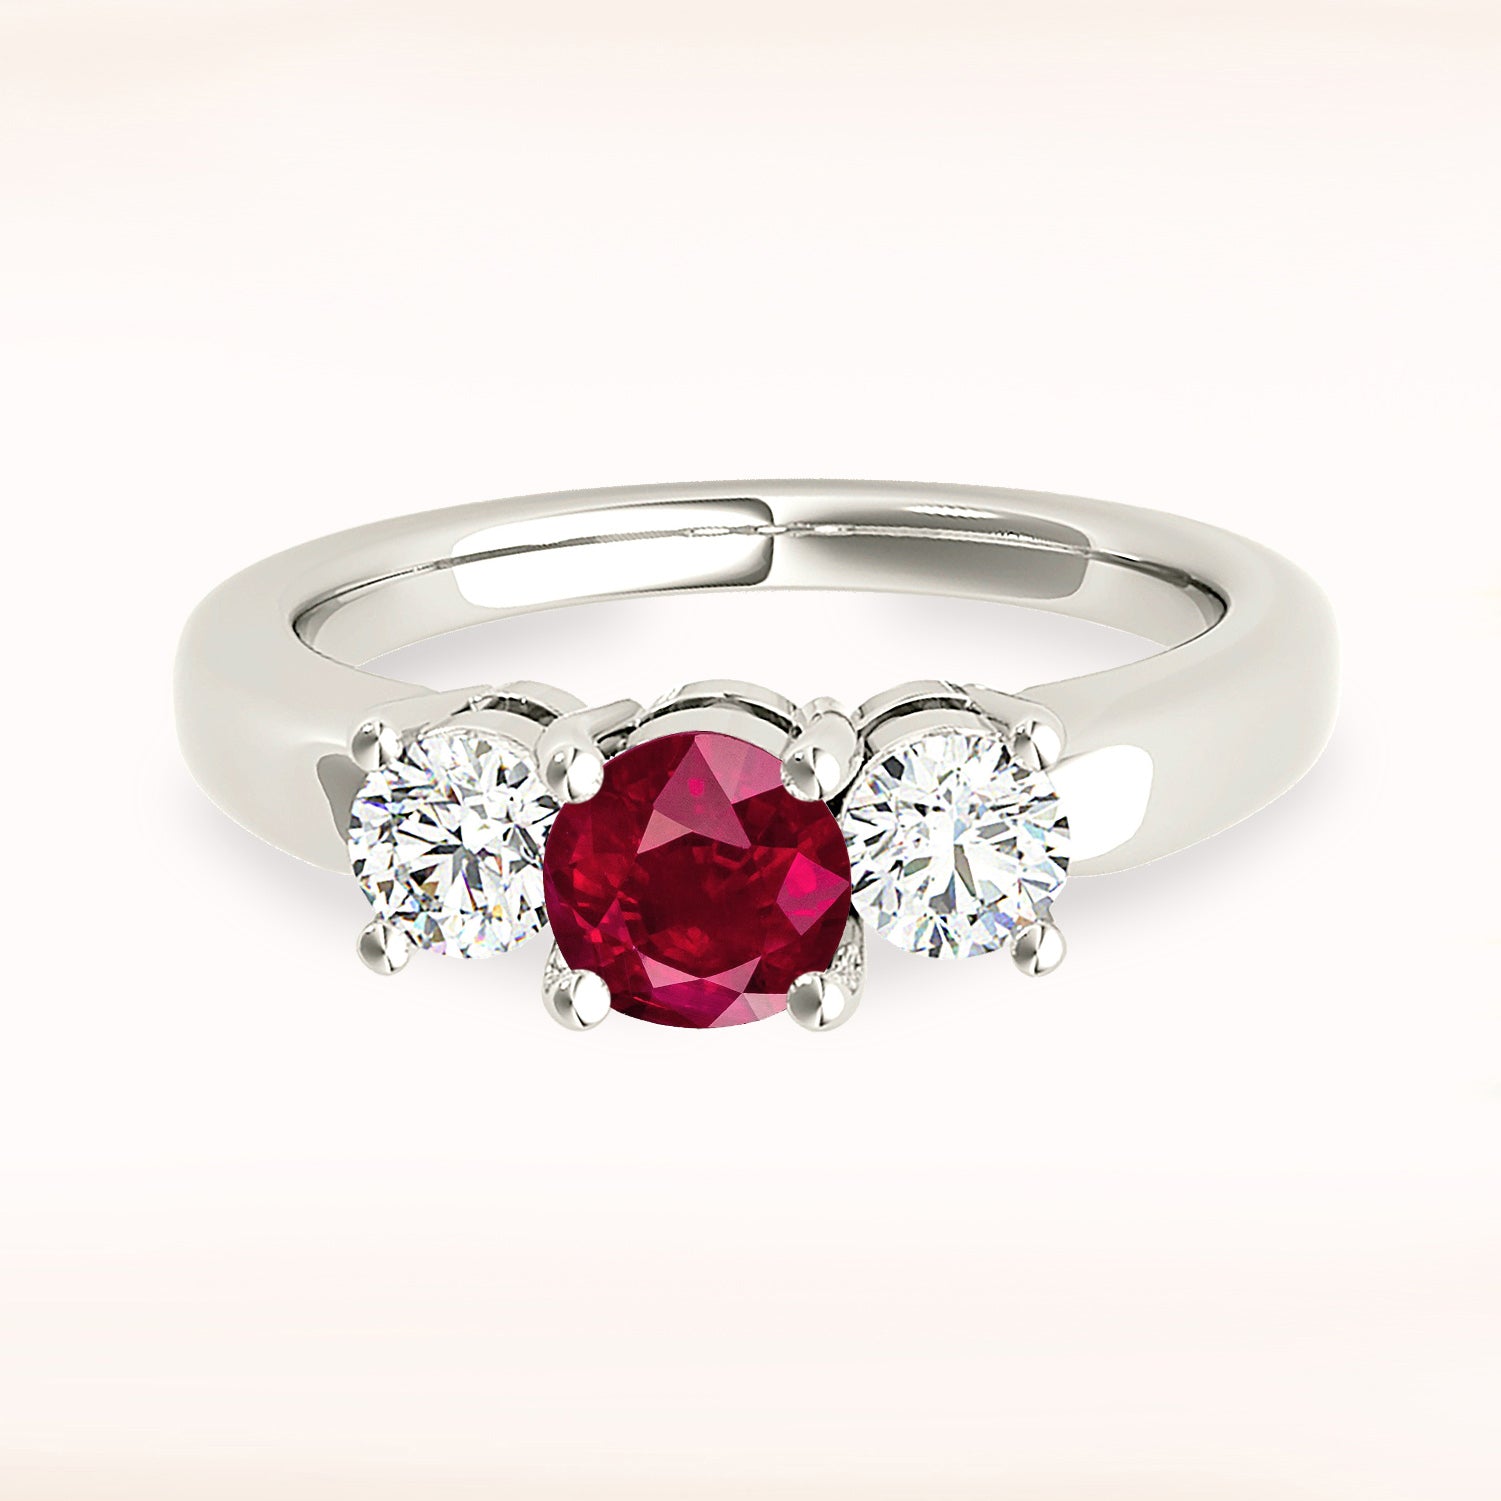 1.16 ct. Genuine Ruby Ring With 0.50 ctw. Side Diamonds, Three Stone Engagement Ring-in 14K/18K White, Yellow, Rose Gold and Platinum - Christmas Jewelry Gift -VIRABYANI